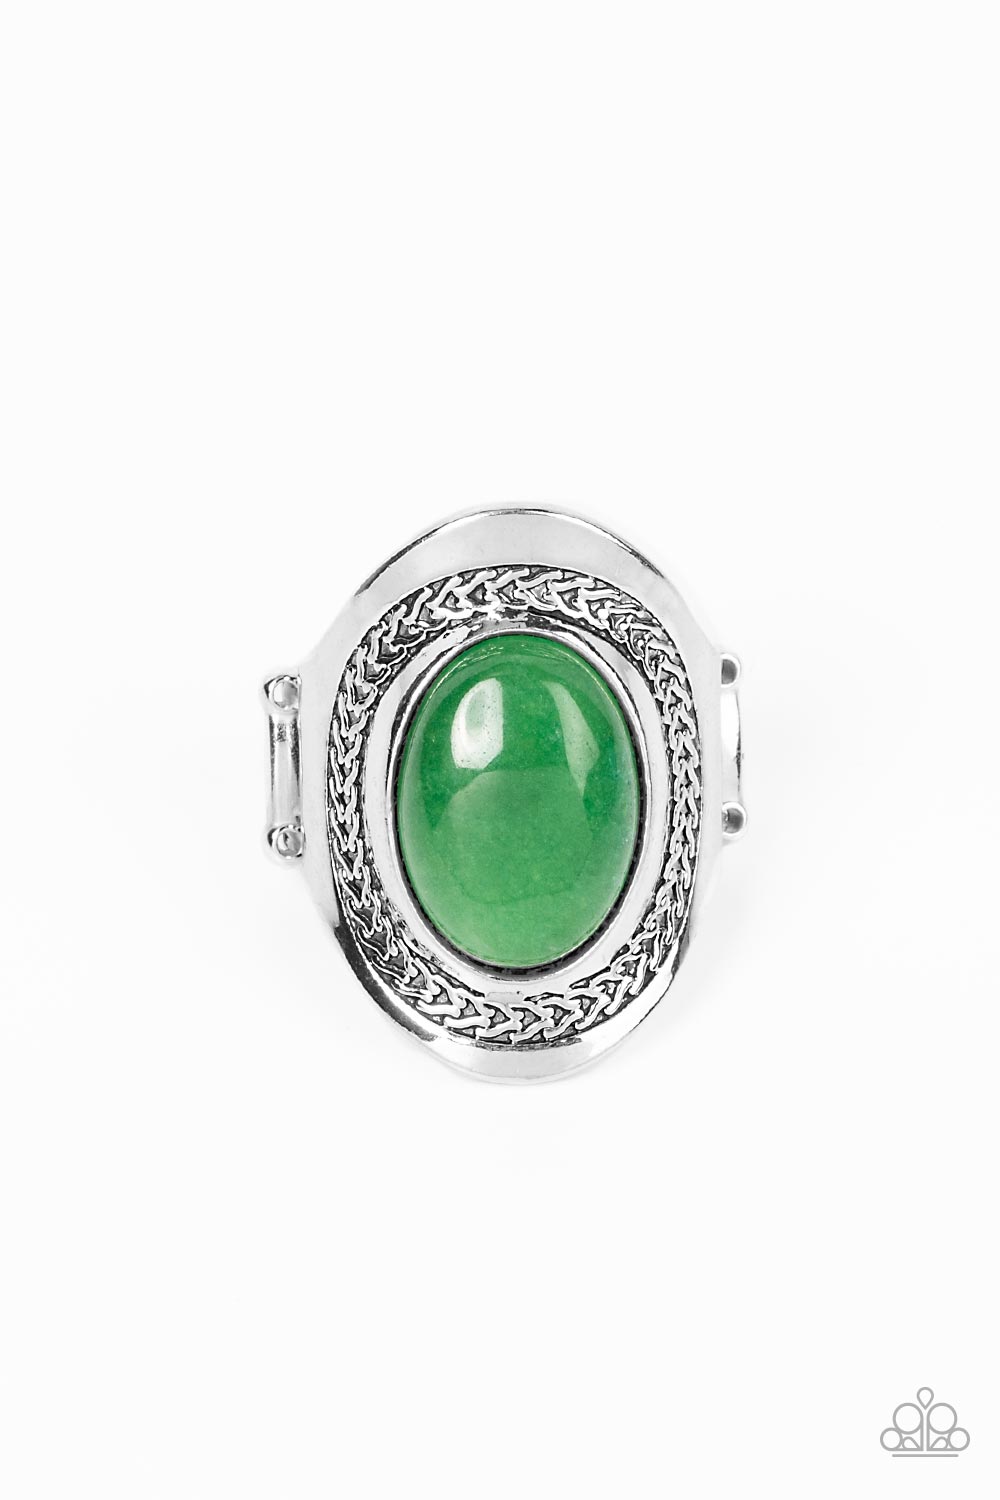 Bordered in a frame of chain-like details, an oval jade stone is pressed into the center of an oval silver frame as it folds around the finger for an enchantingly earthy look. Features a stretchy band for a flexible fit.